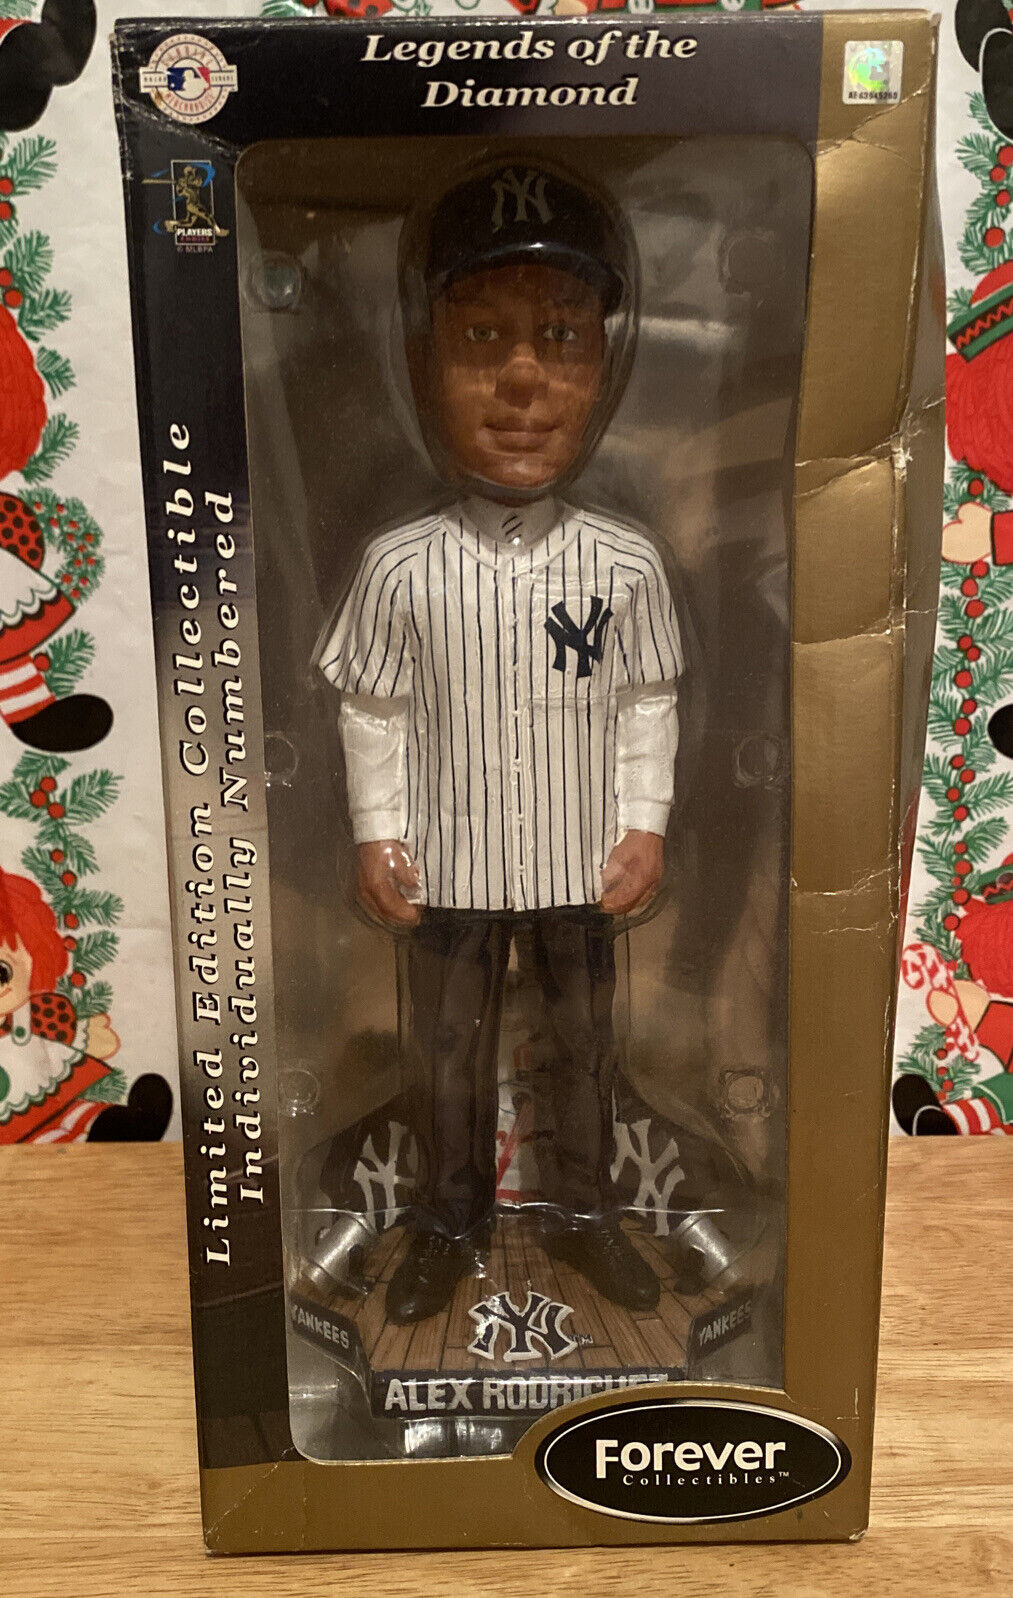 A-Rod FOREVER COLLECTIBLES LEGENDS OF THE DIAMOND ALEX RODRIGUEZ BOBBLEHEAD Toy